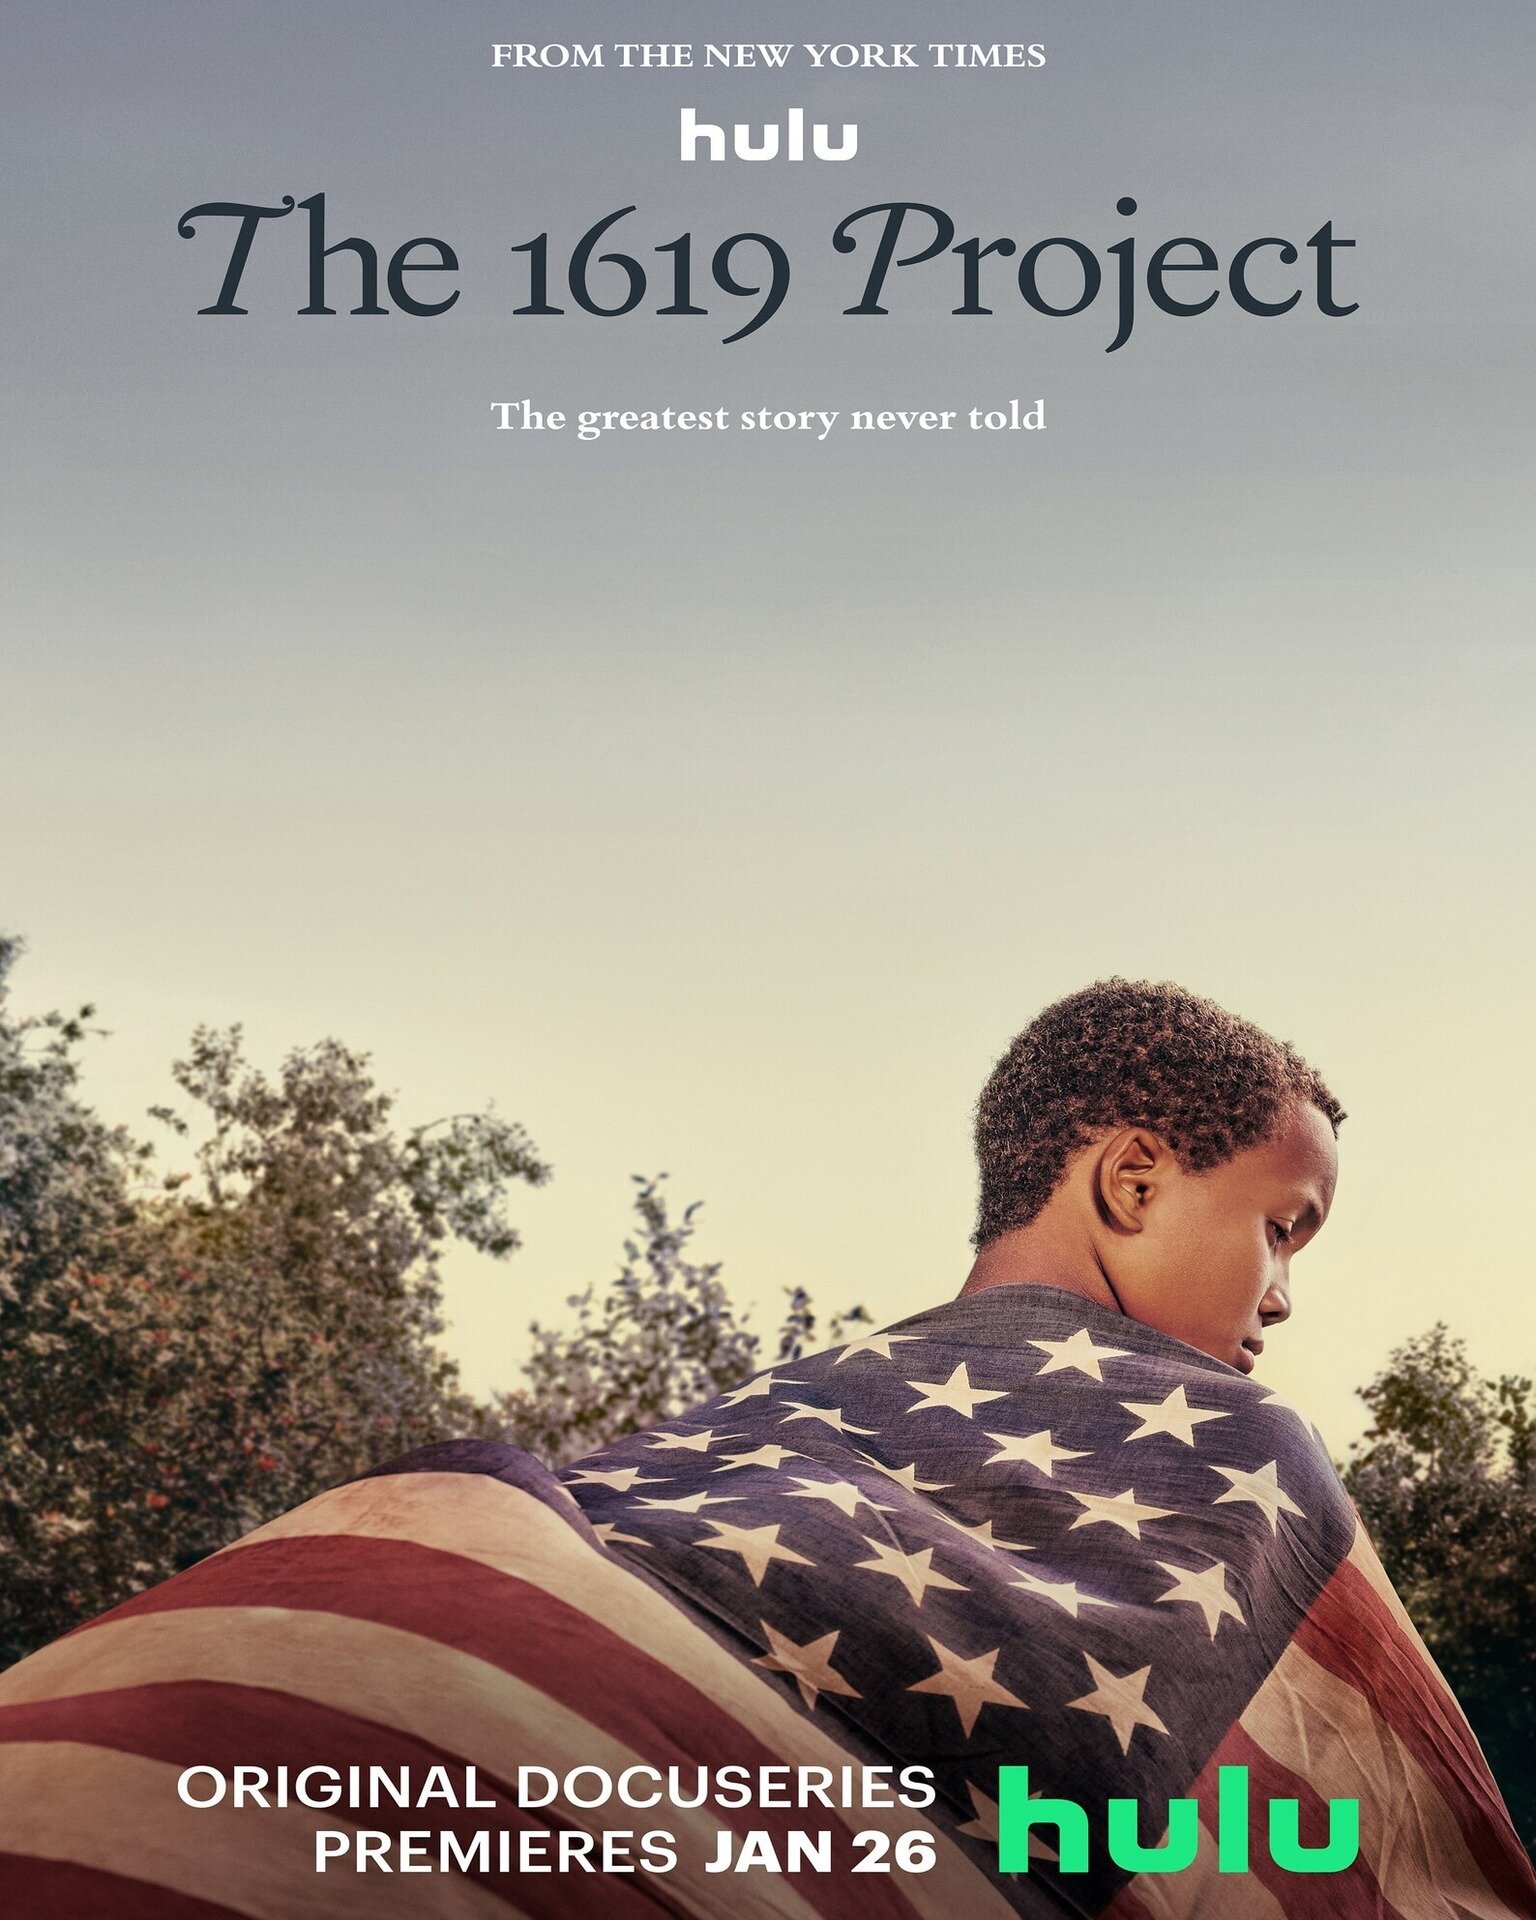 NEW CEU Project!

The 1619 Project Docuseries is an 6-part expansion on Hulu of the &ldquo;1619 Project&rdquo; created by Pulitzer Prize-winning journalist Nikole Hannah-Jones and the New York Times Magazine. The series seeks to reframe the country&r